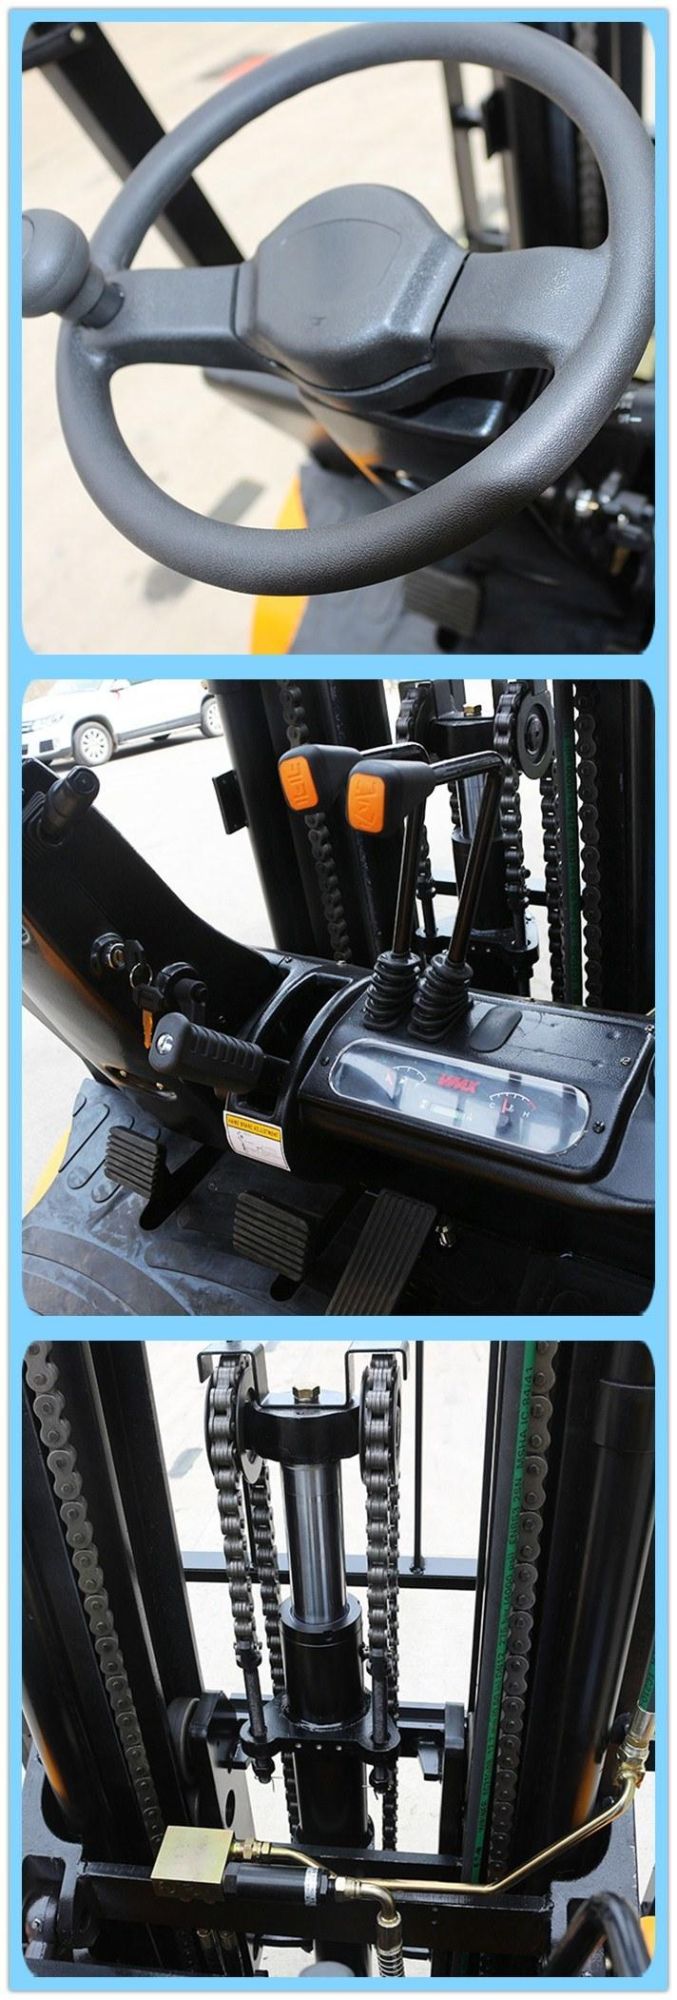 ACTIVE New Model CPCD30 Diesel Forklift Truck with CE Approved